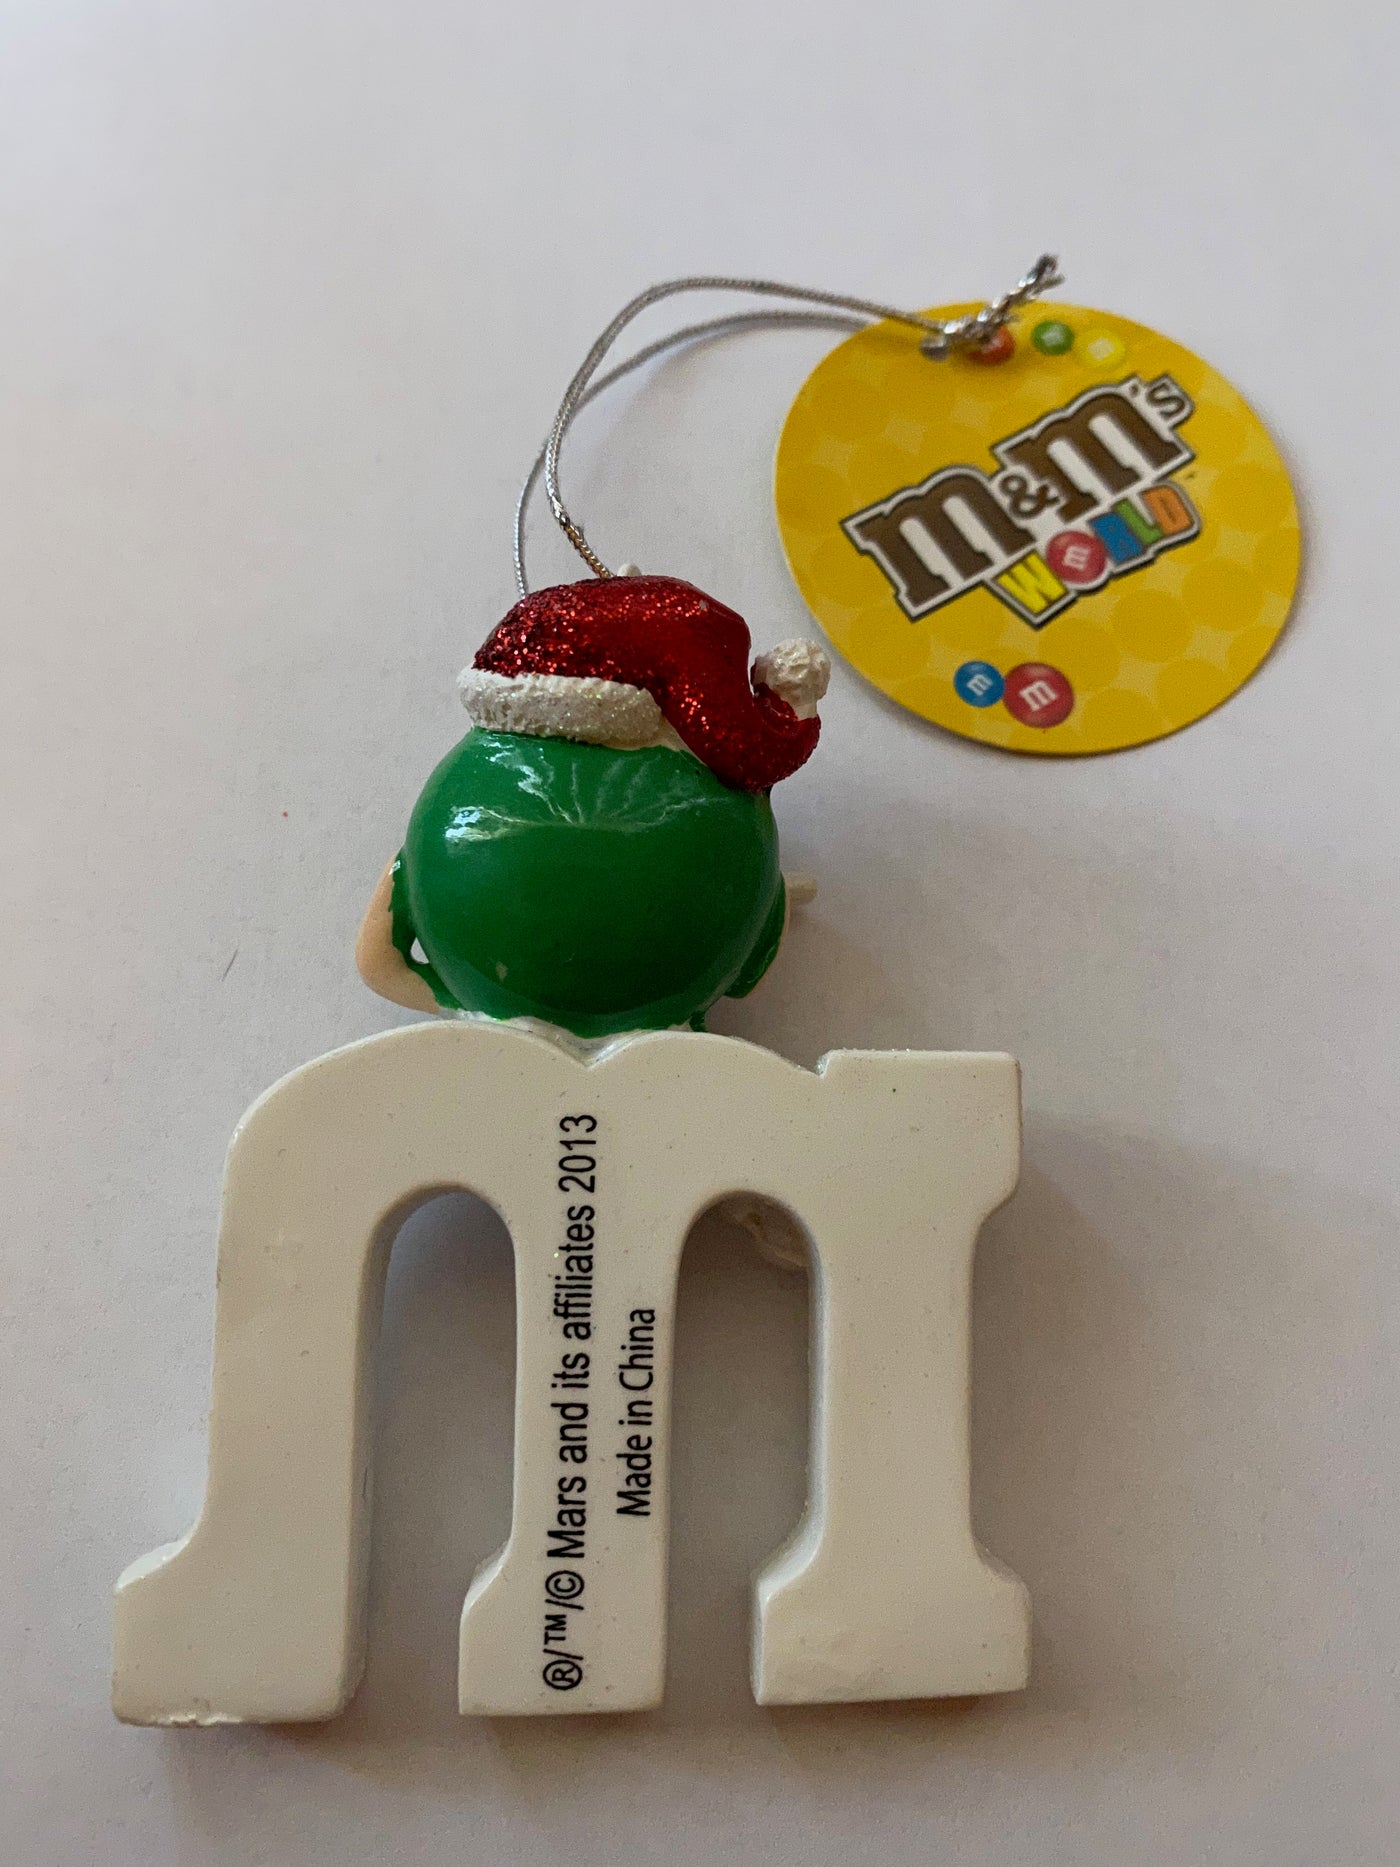 M&M's World M with Green Character Resin Christmas Ornament New with Tag